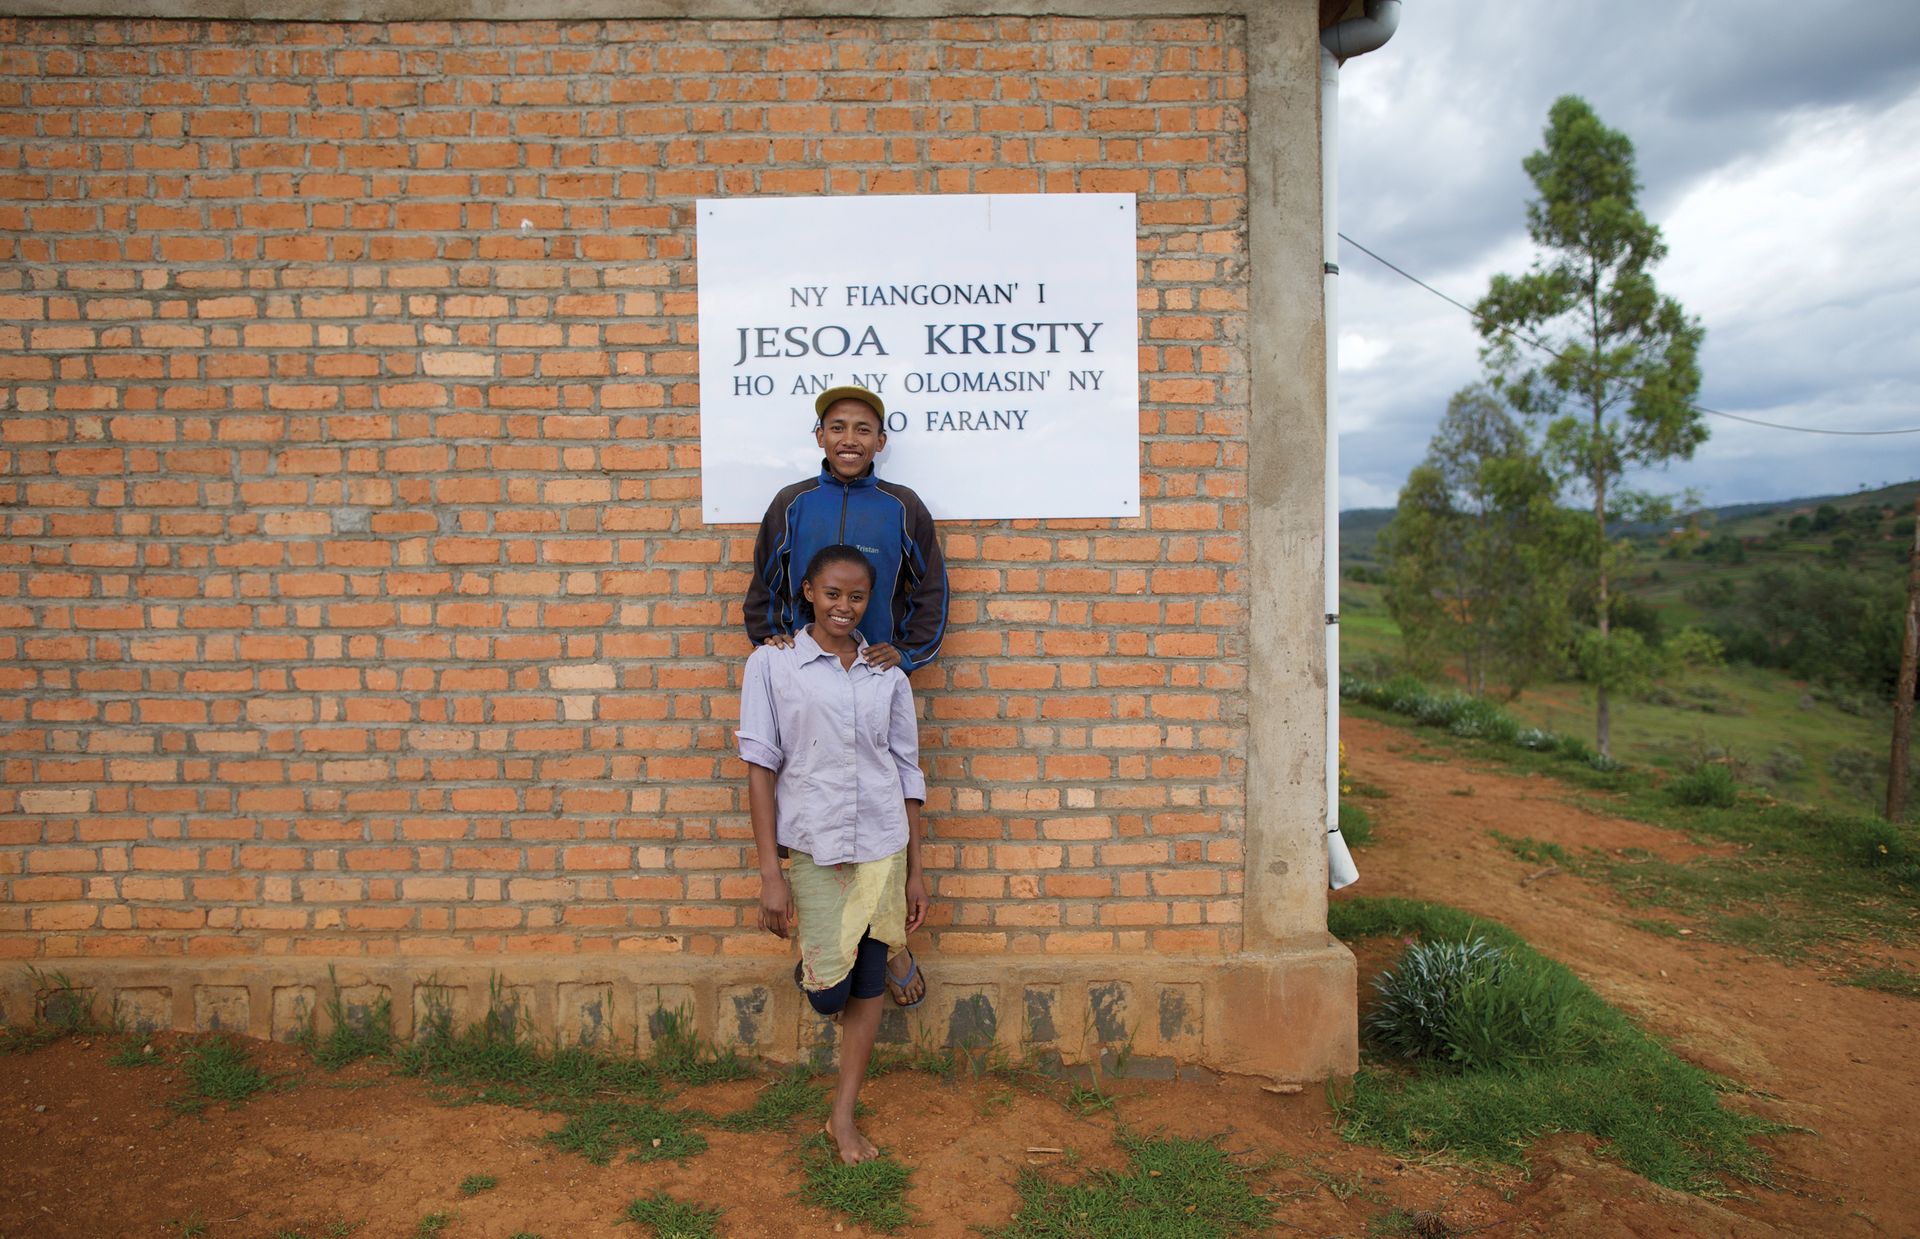 Rakotomalala and Razafindravaonasolo stand in front of the new chapel in Sarodroa. This chapel, made of concrete and brick, was built by the members.